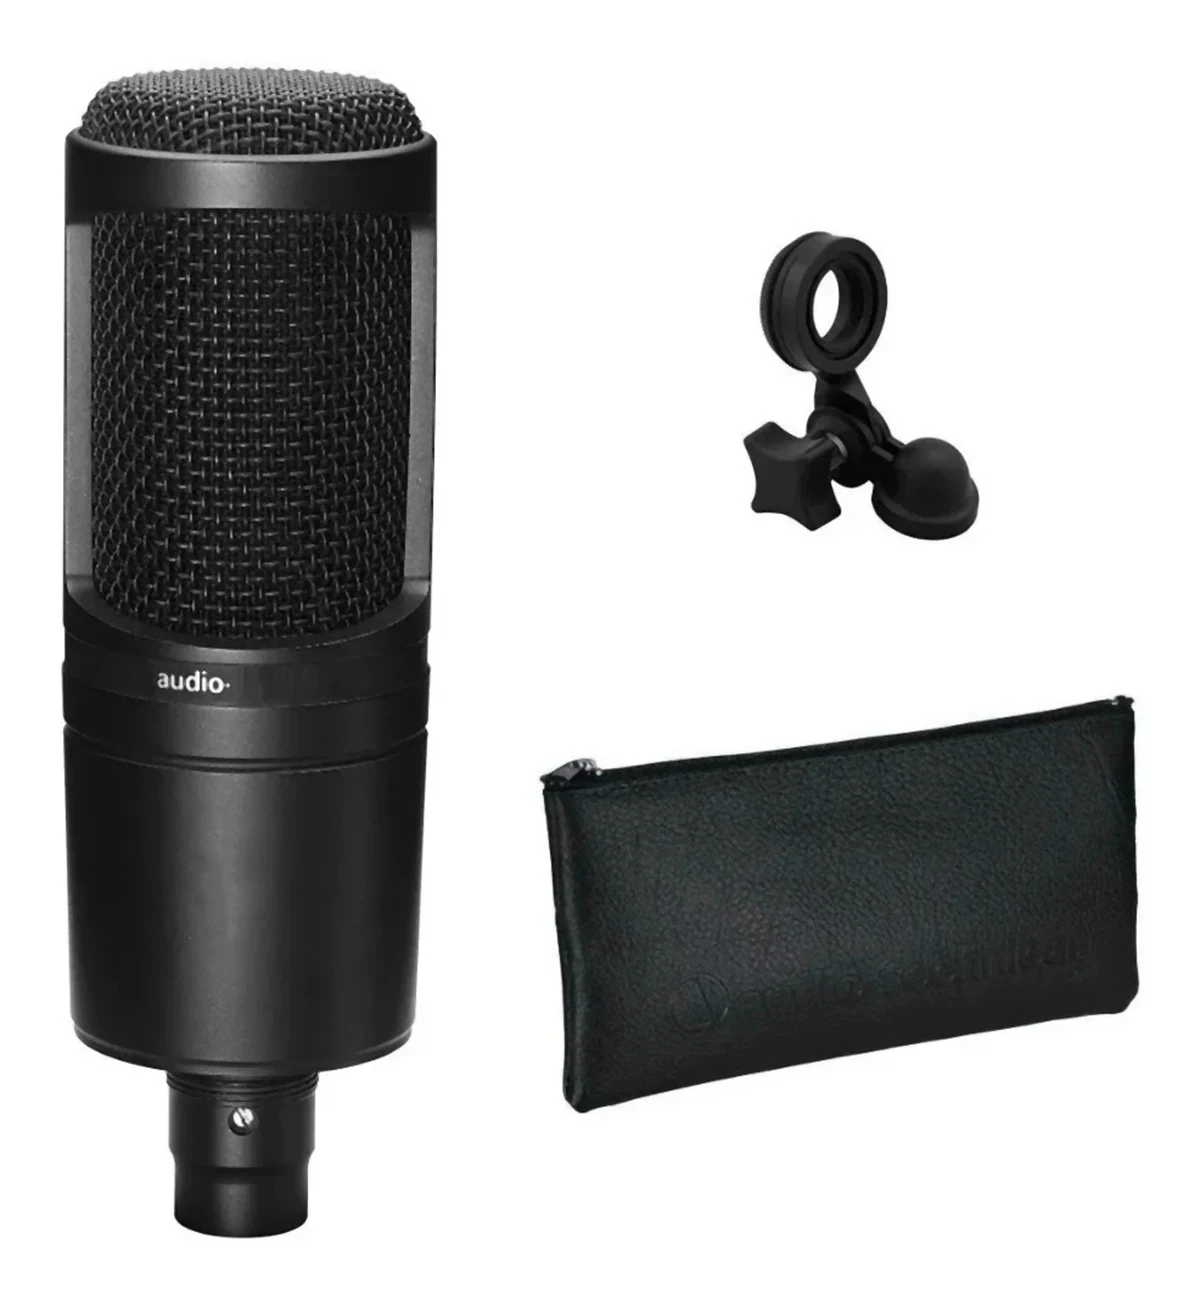 

Audio AT2020 Cardioid Condenser Microphone 20-20000Hz Three Pin XLRM Male Microphone for Recording Anchor Karaoke MIC